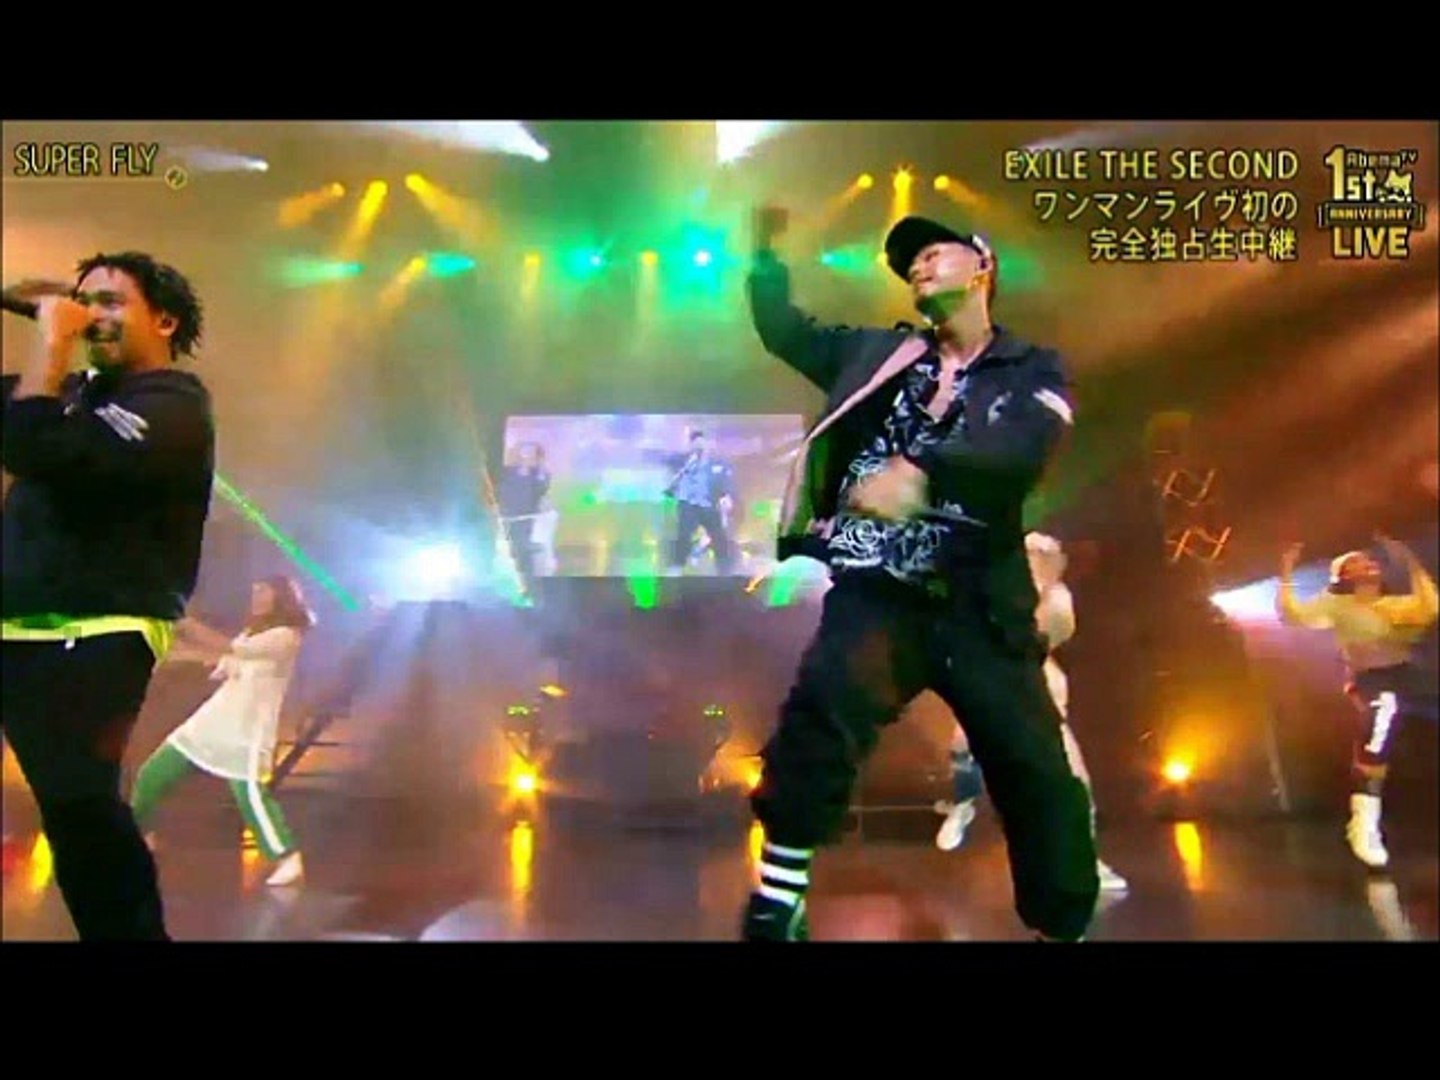 Exile The Second ライブ２ 動画 Dailymotion